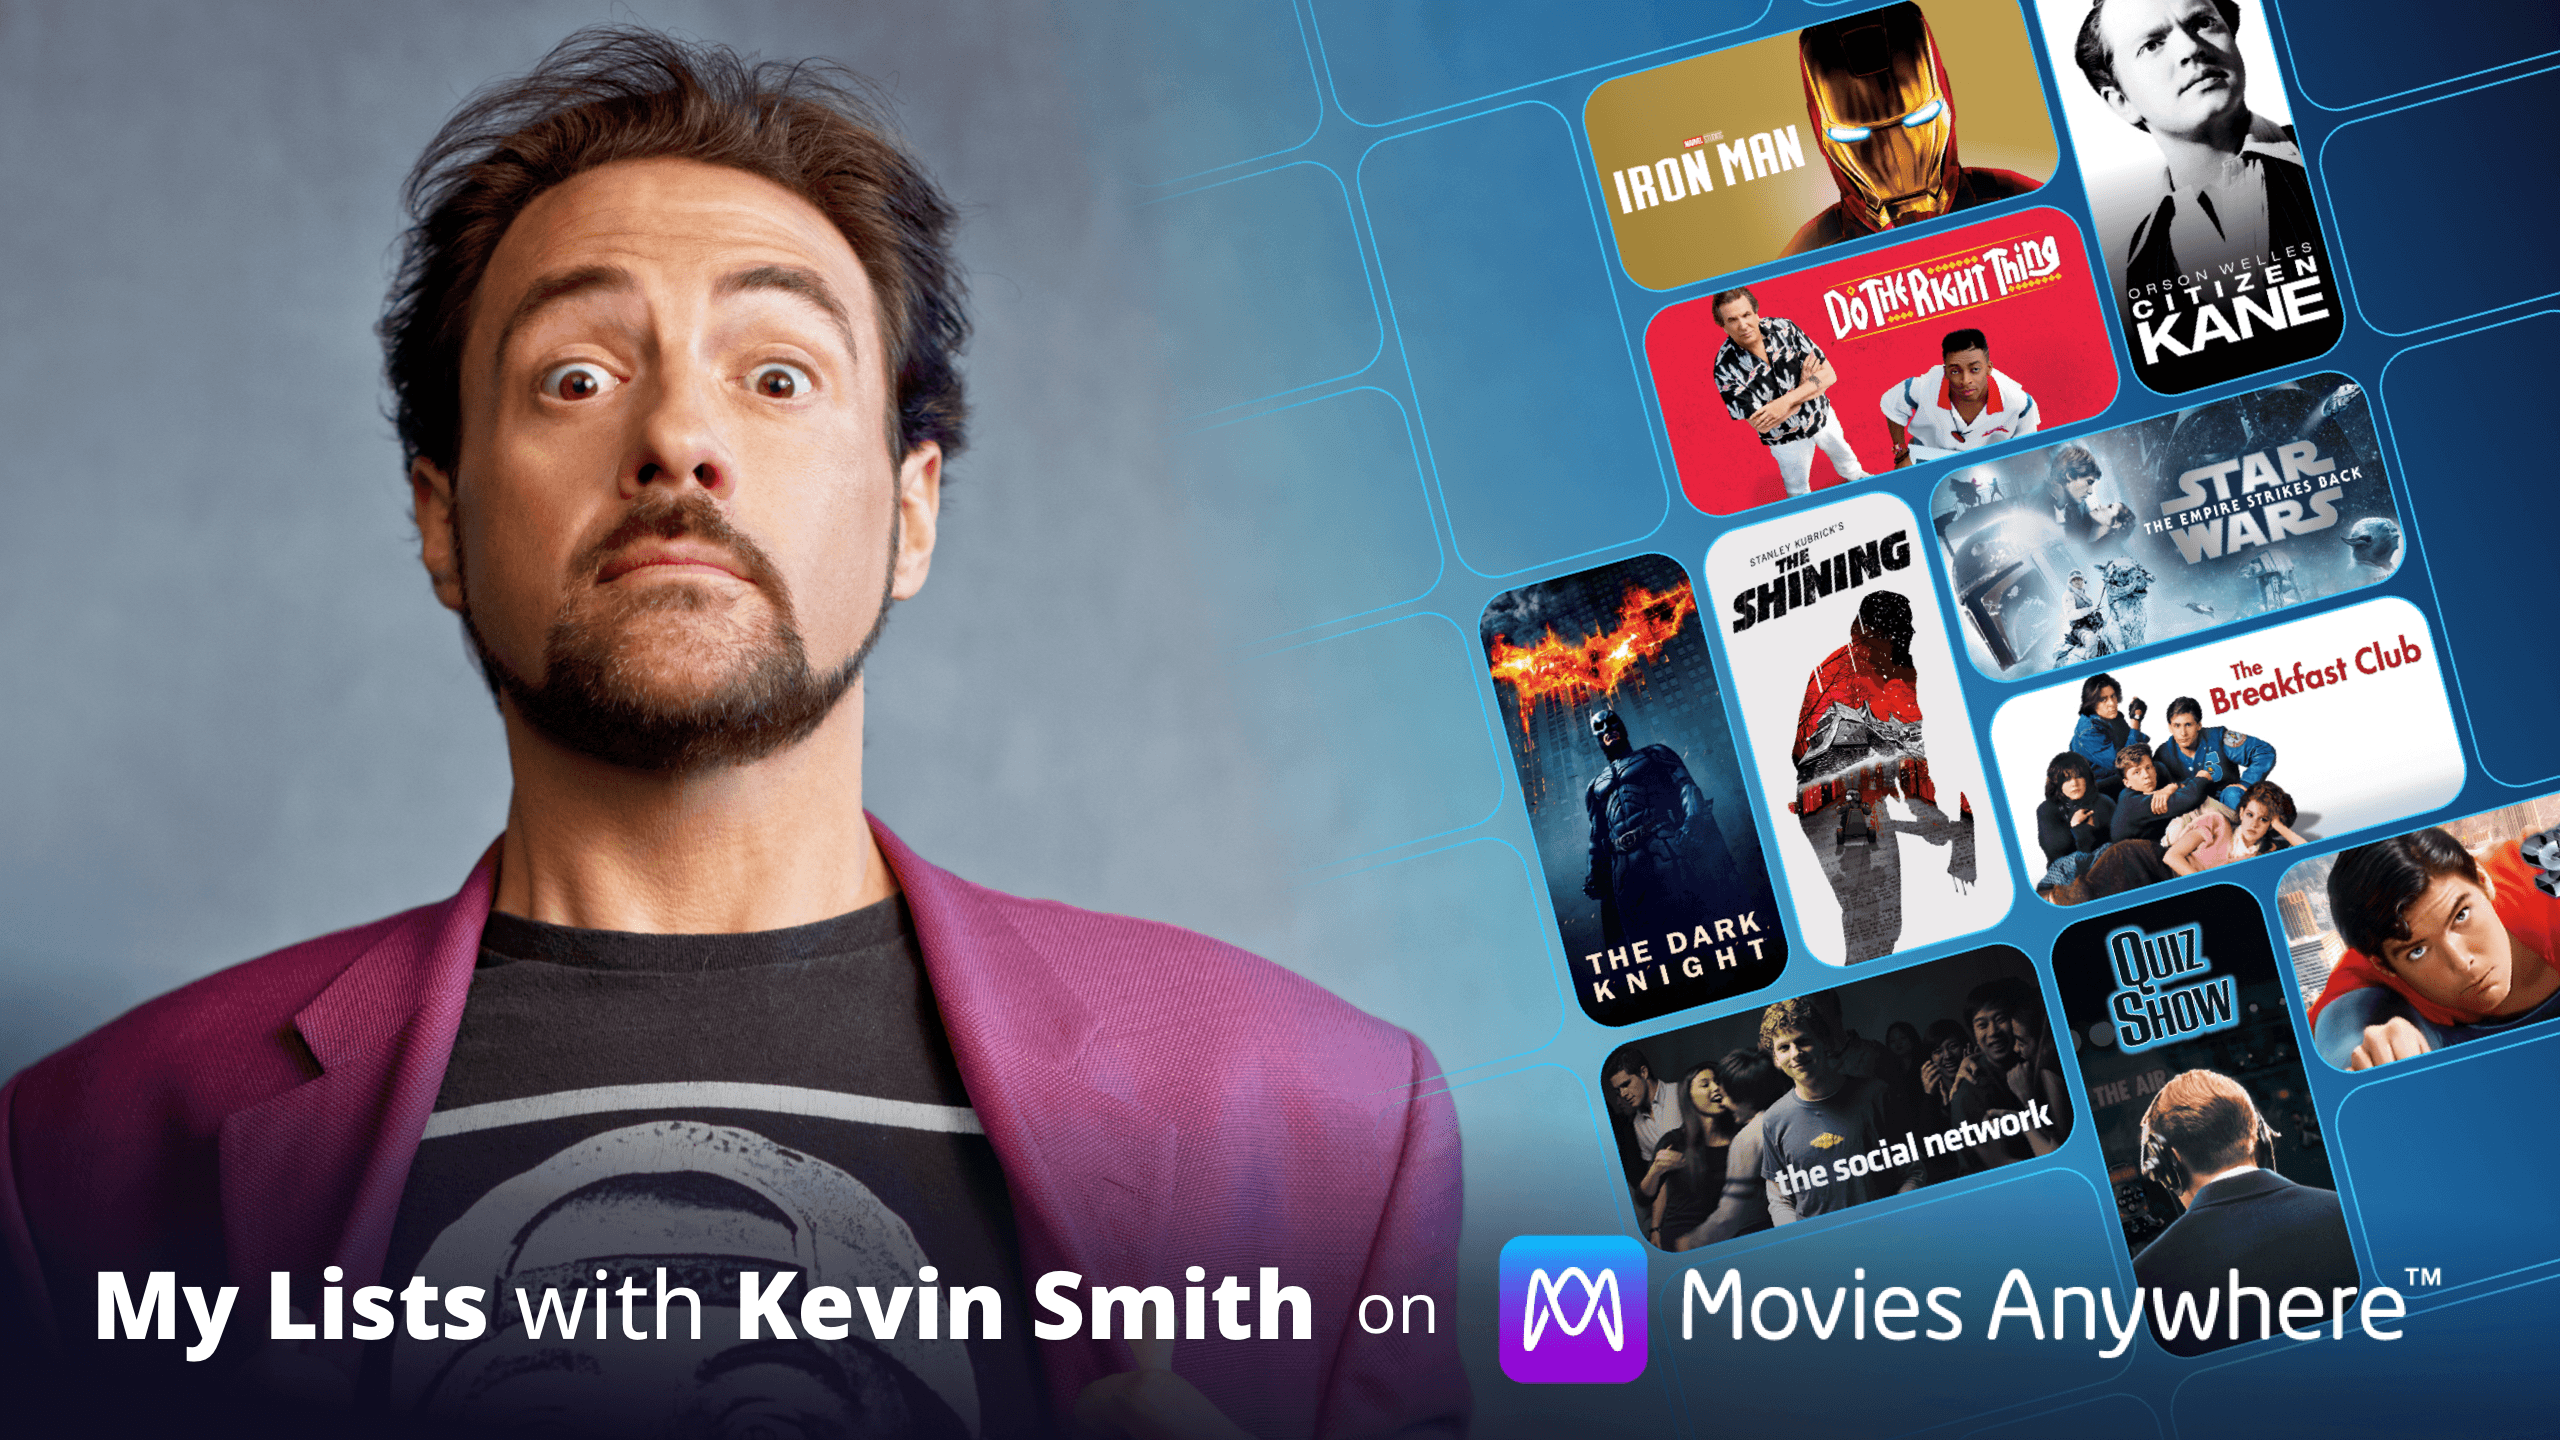 Take a Look at Kevin Smith’s Personal Movie Collection with ‘My Lists’ on Movies Anywhere